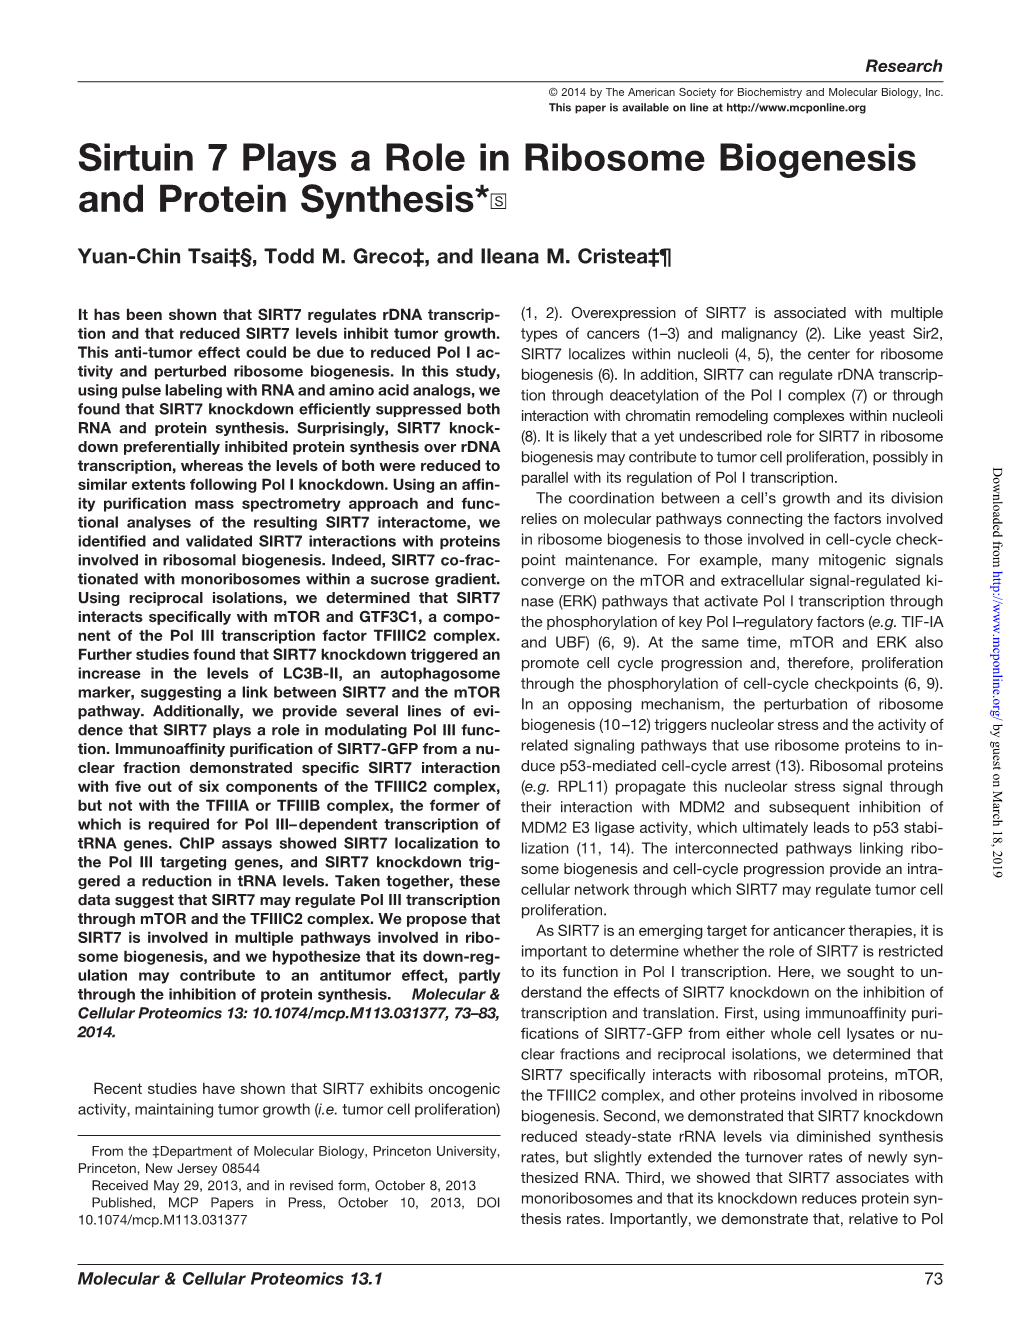 Sirtuin 7 Plays a Role in Ribosome Biogenesis and Protein Synthesis*DS